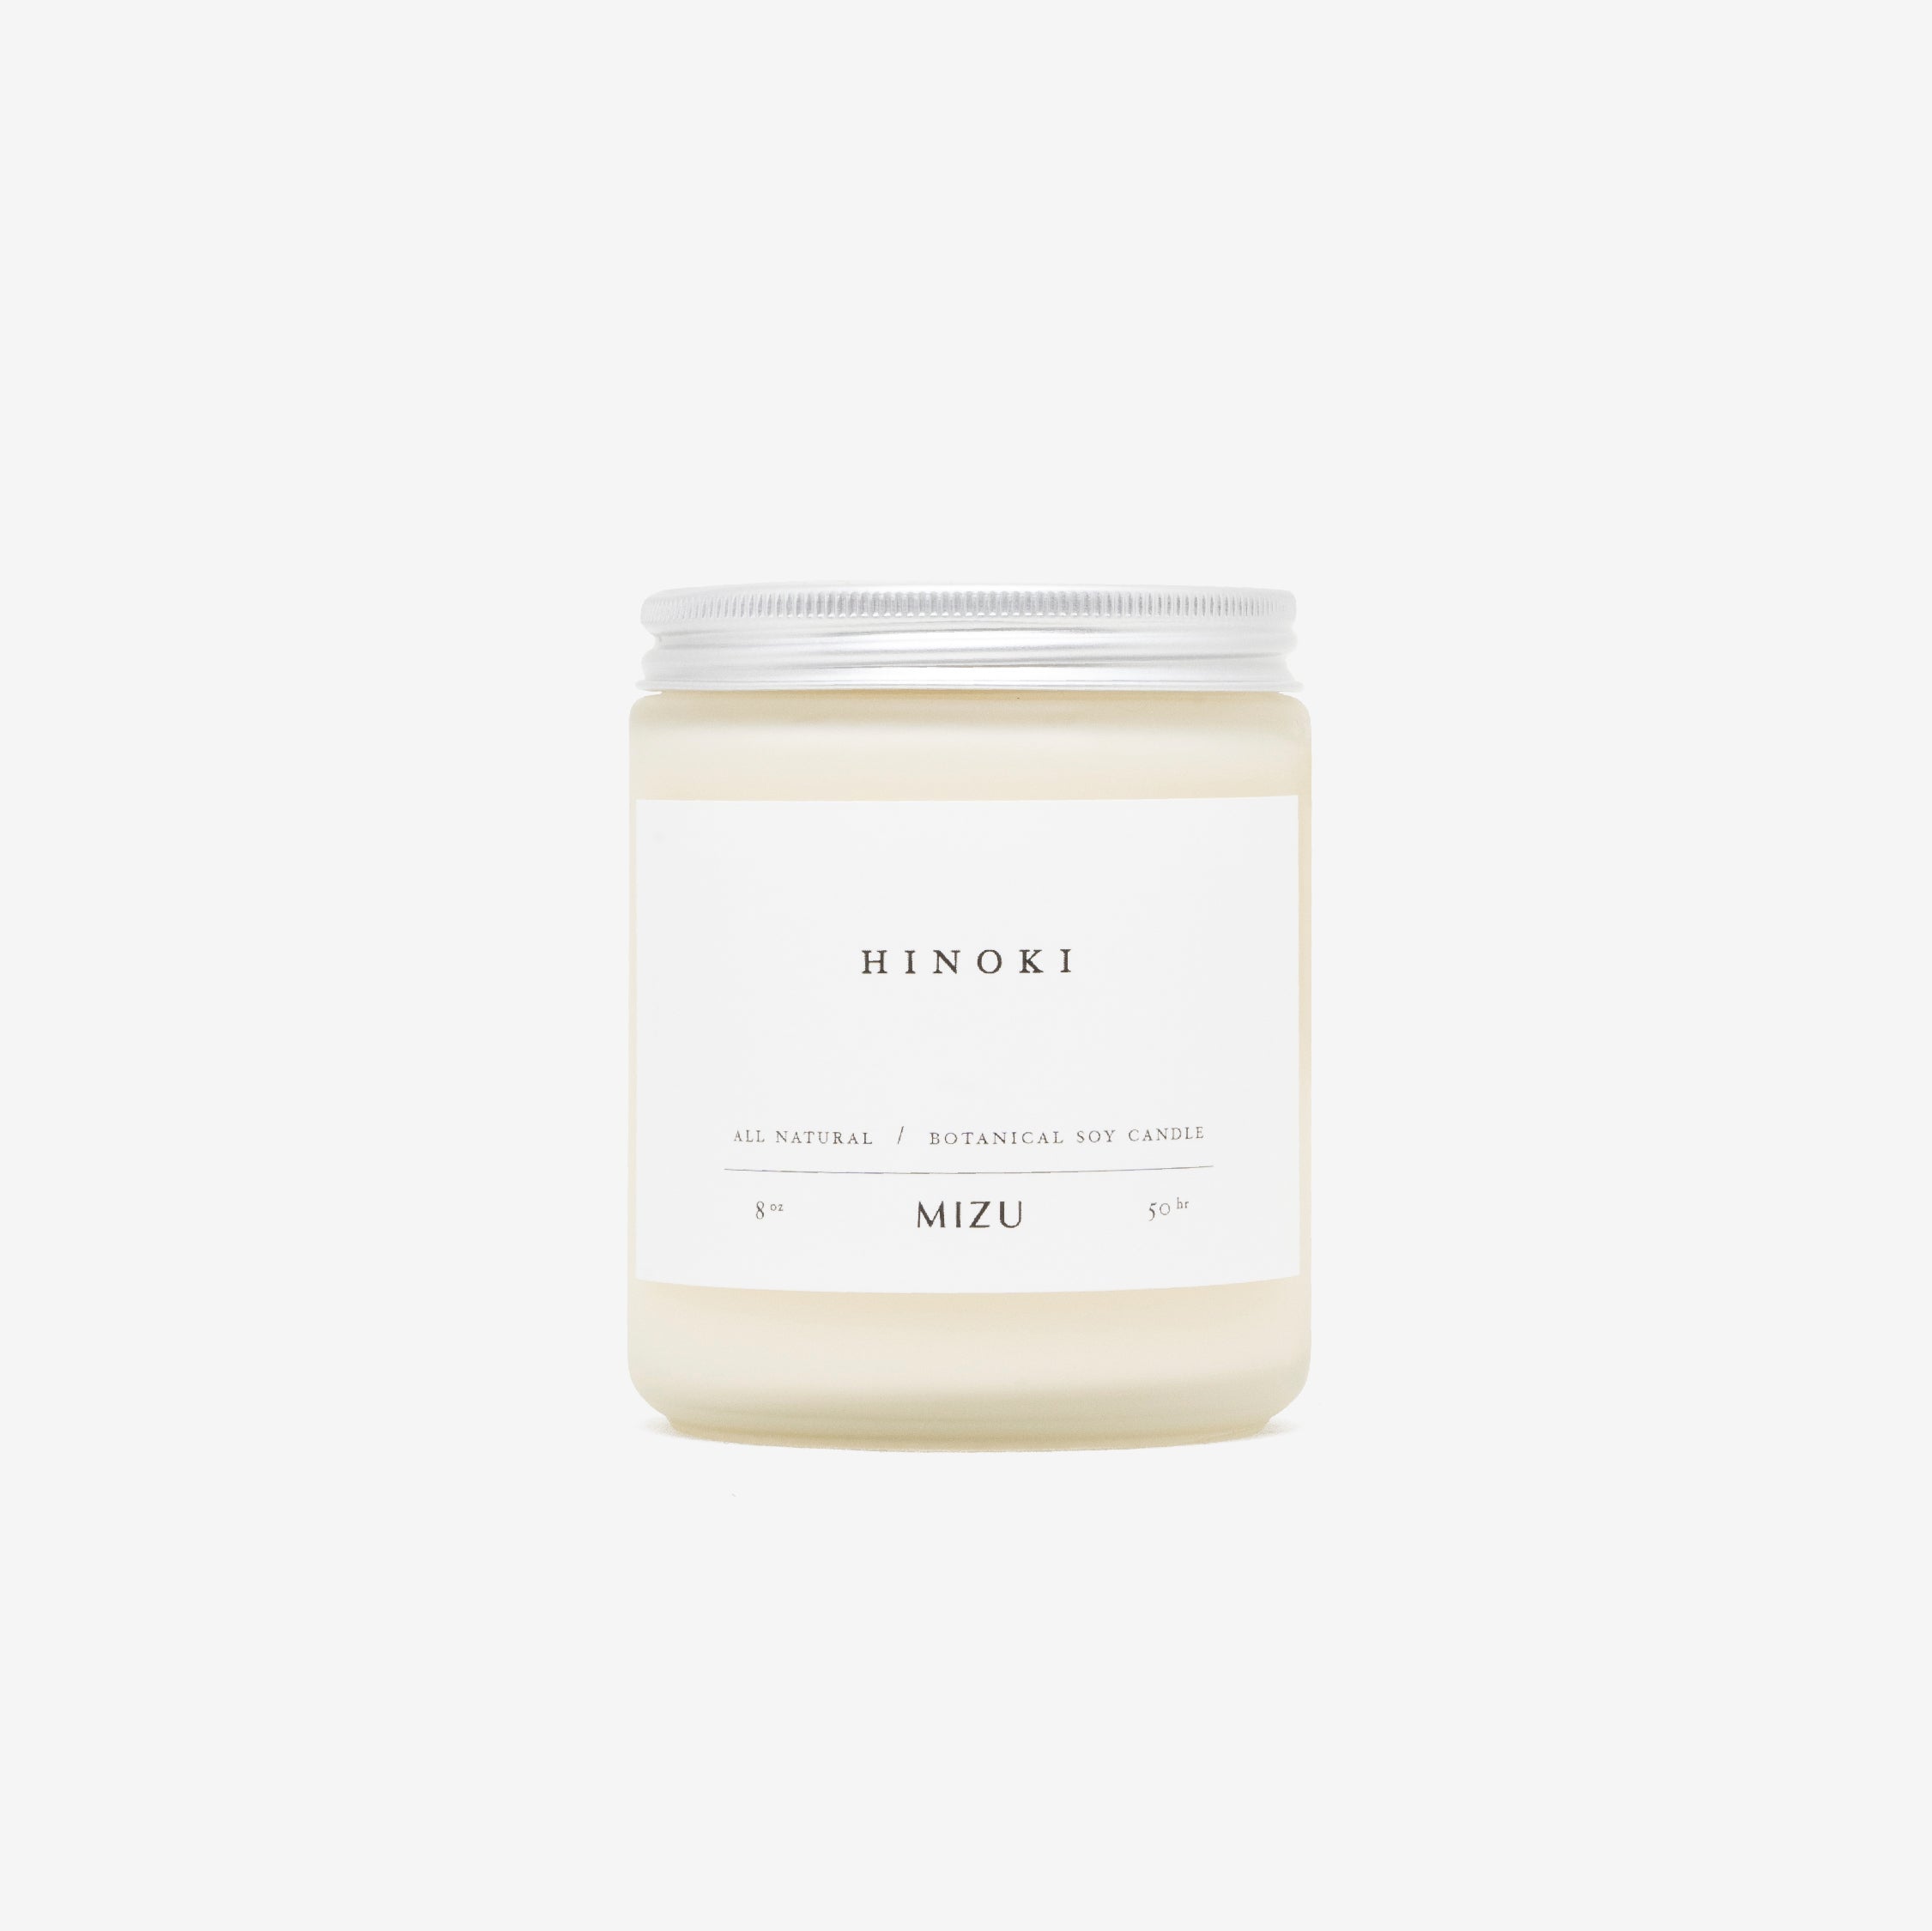 Hinoki essential oil candle